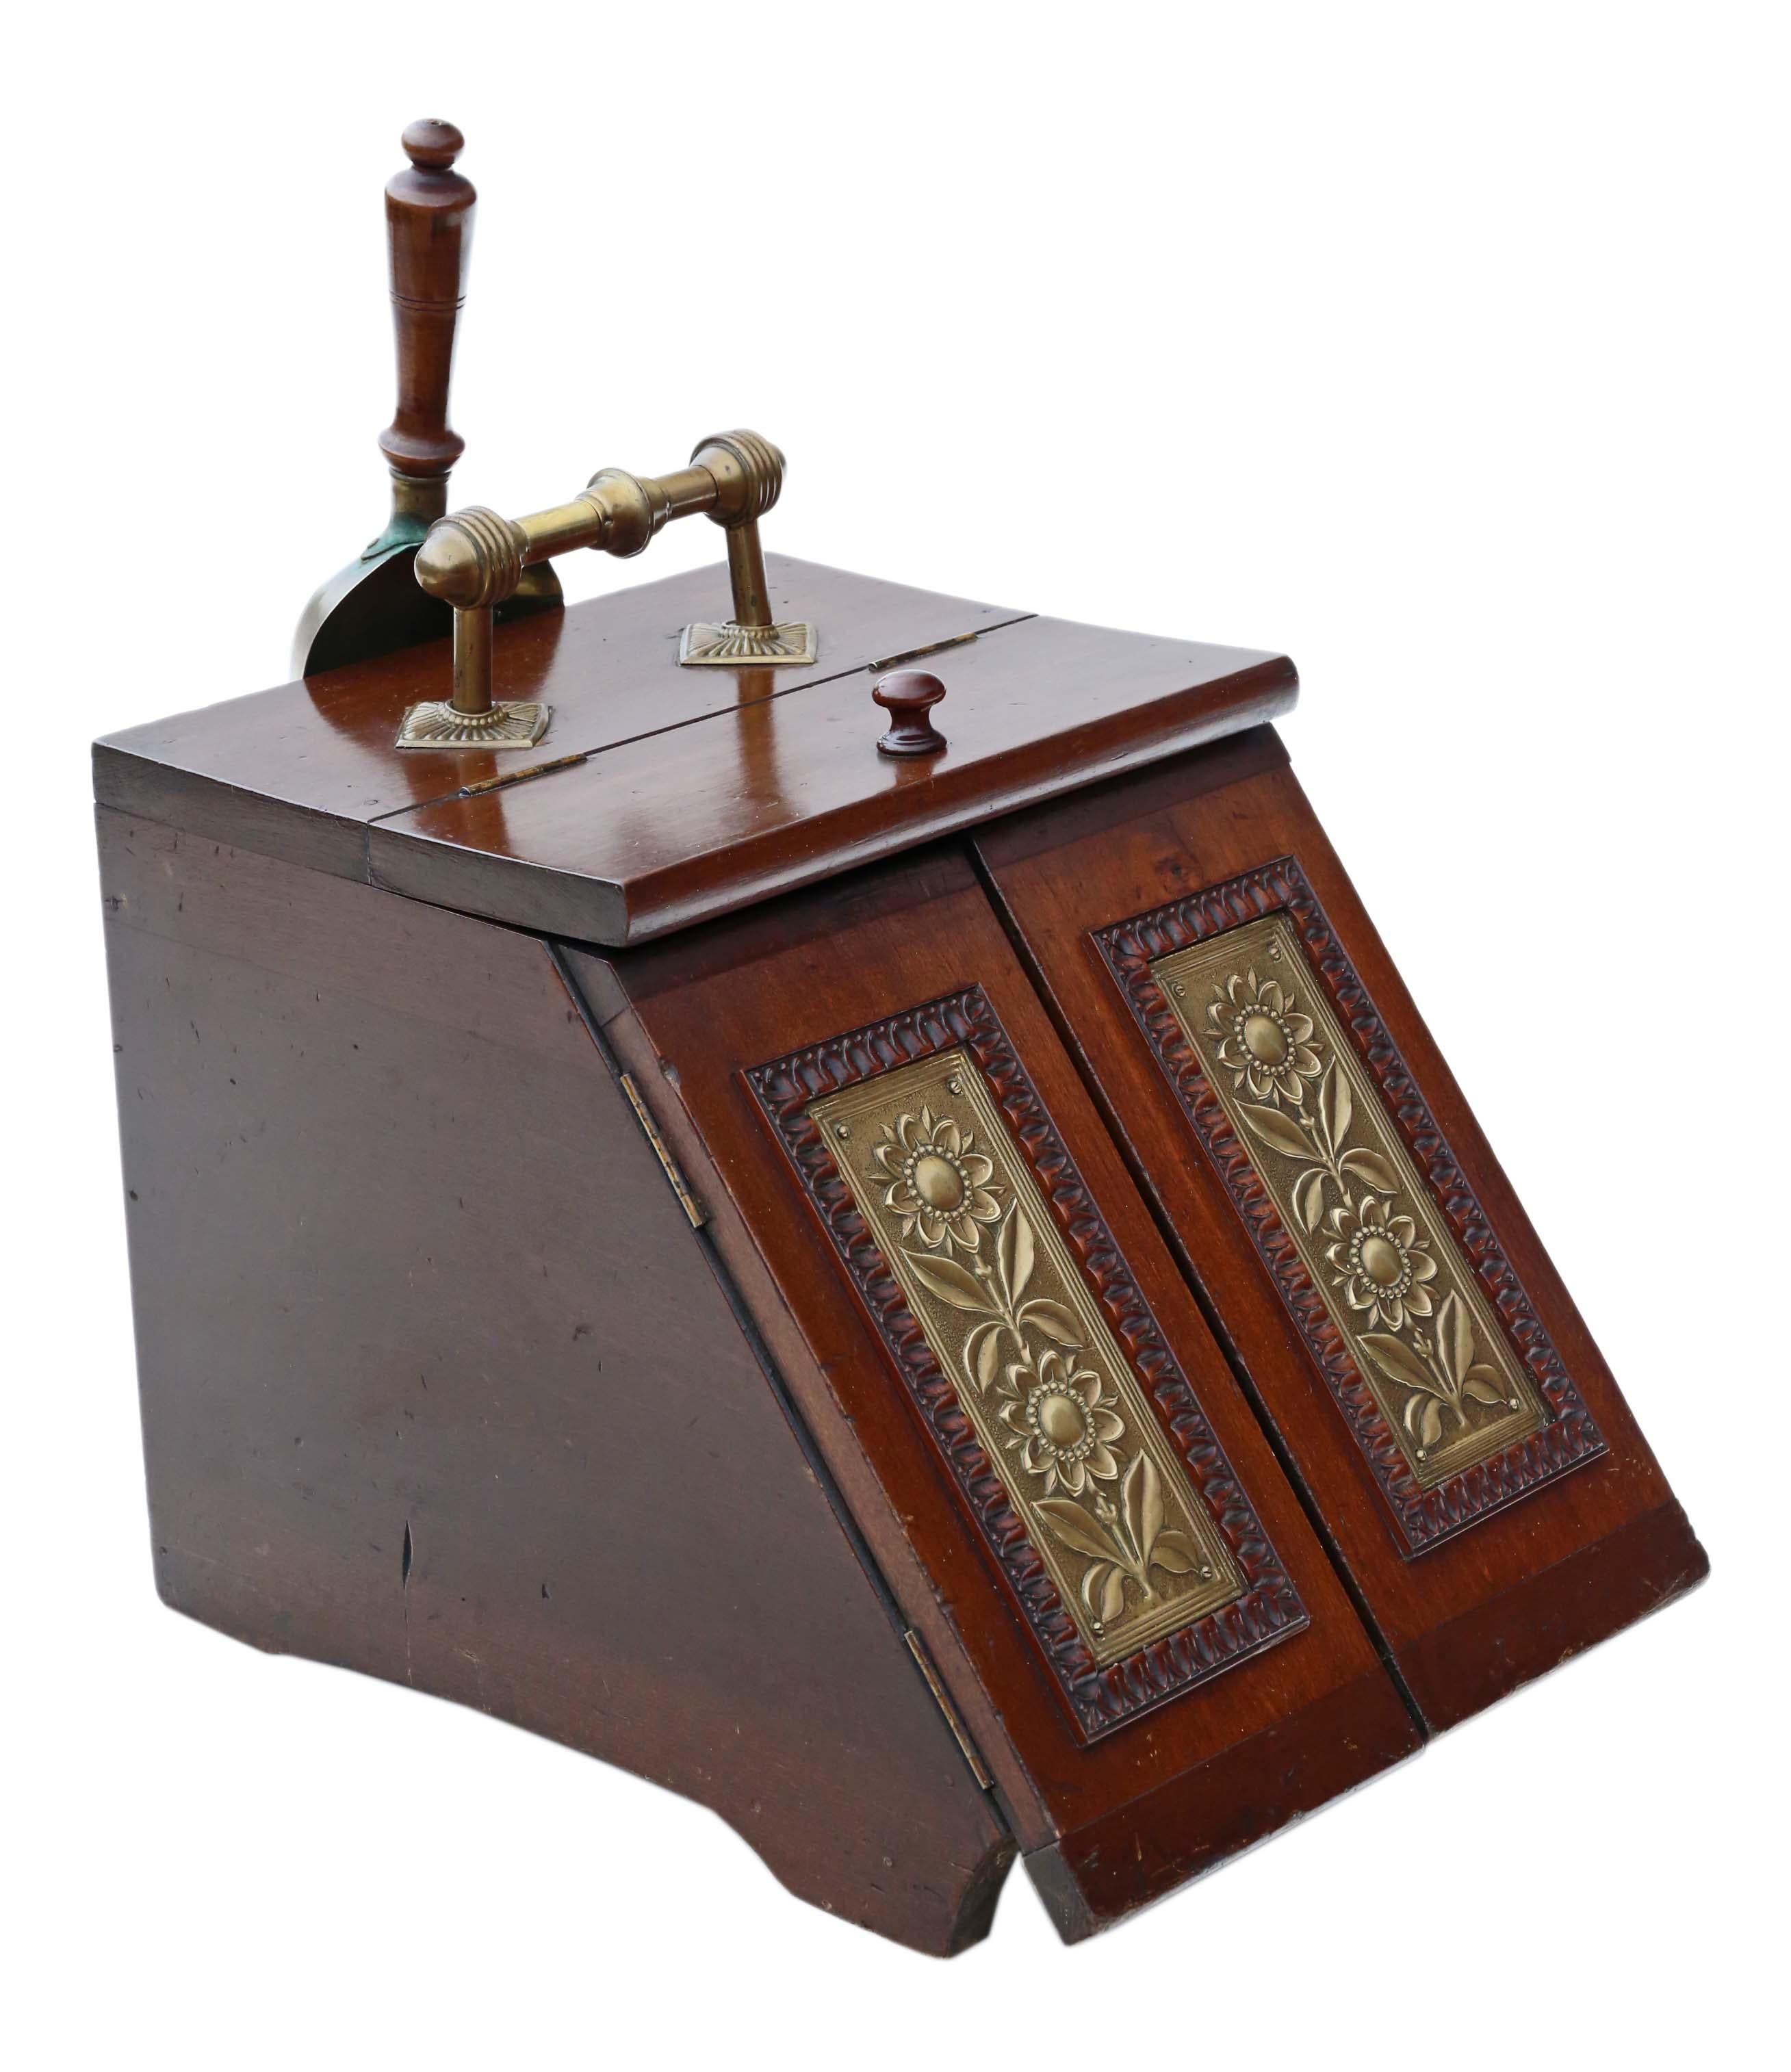 Antique Art Nouveau beech, walnut and brass coal scuttle box, circa 1910.
This is a lovely item, that is full of charm and character. Great decorative brass panels.
This is a heavy quality piece, with no loose joints... far better than most. No